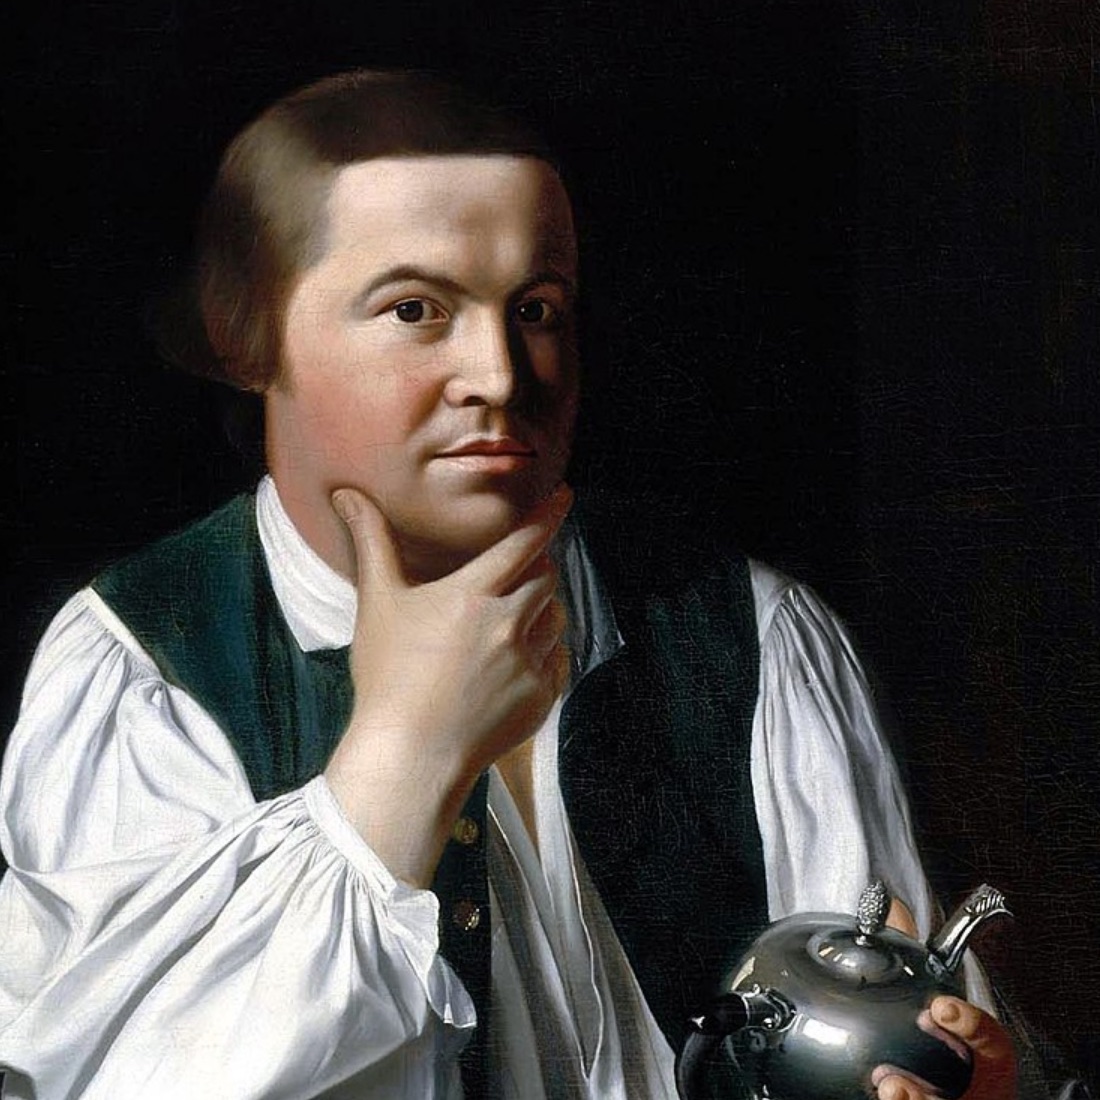 Paul Revere is the central figure in David Hackett Fischer's Paul Revere's Ride, the subject of this Revolutionary Conversations lesson.